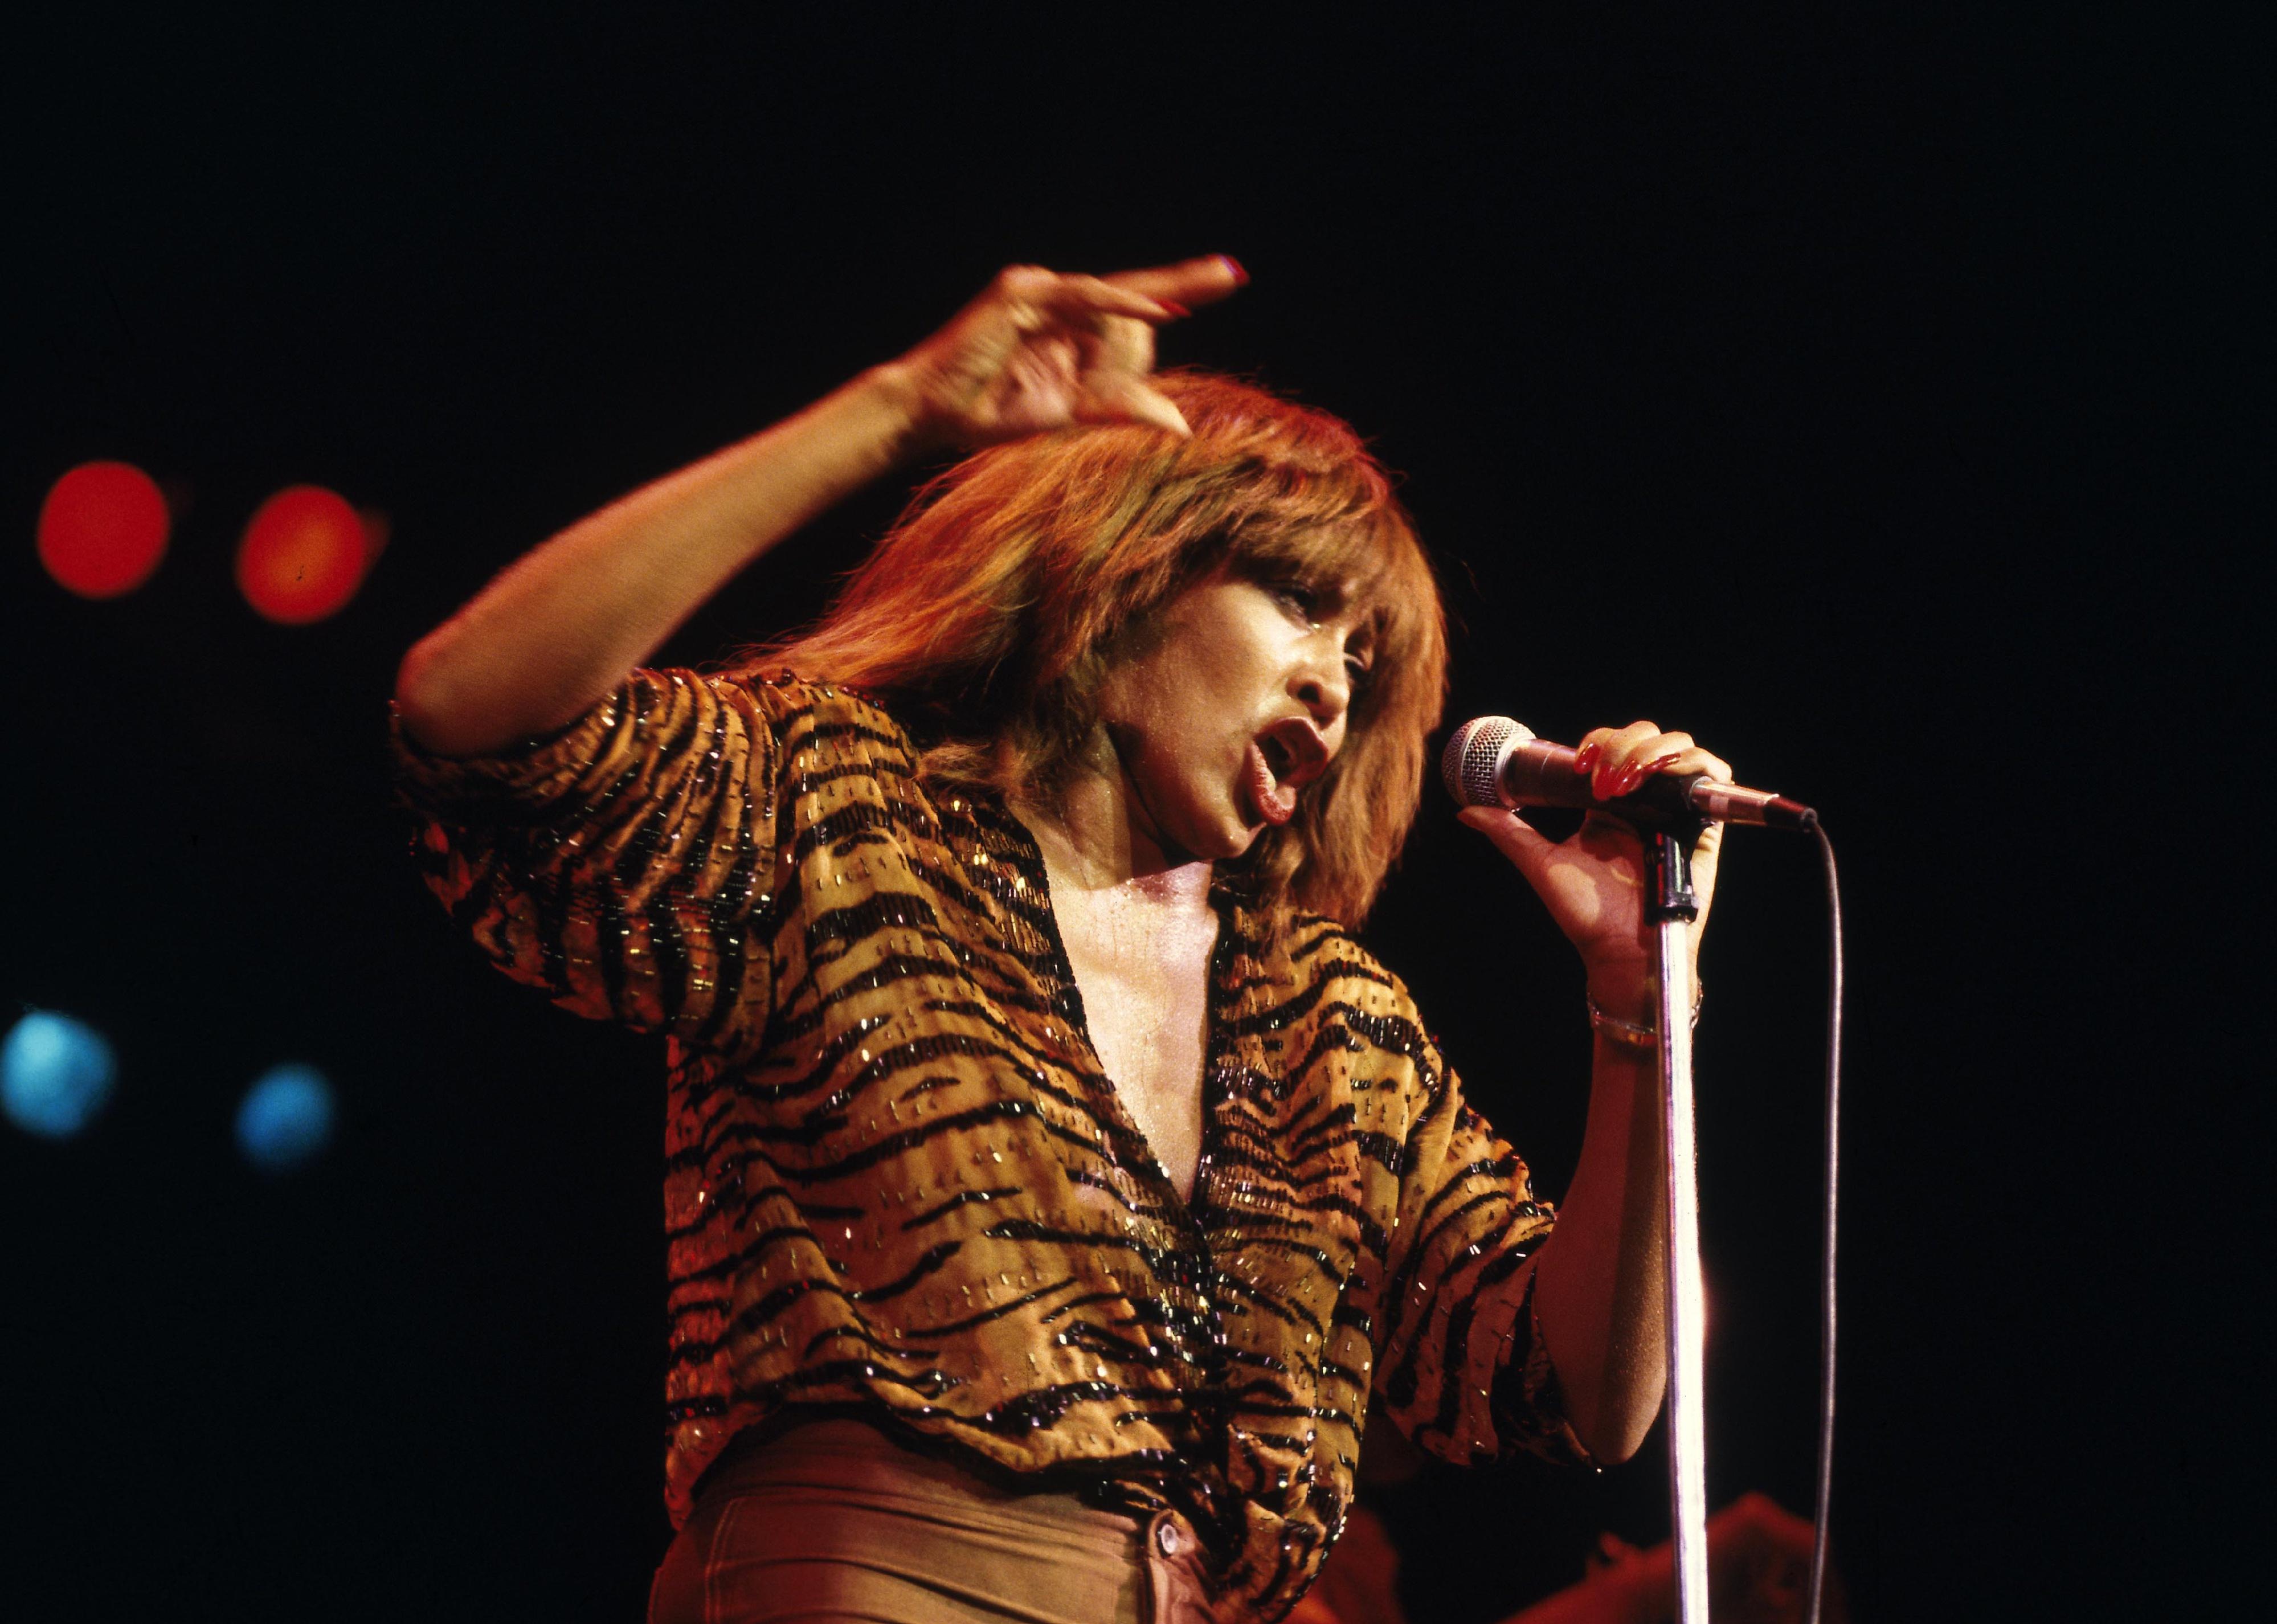 Tina Turner performs live on stage at Hammersmith Odeon in London.